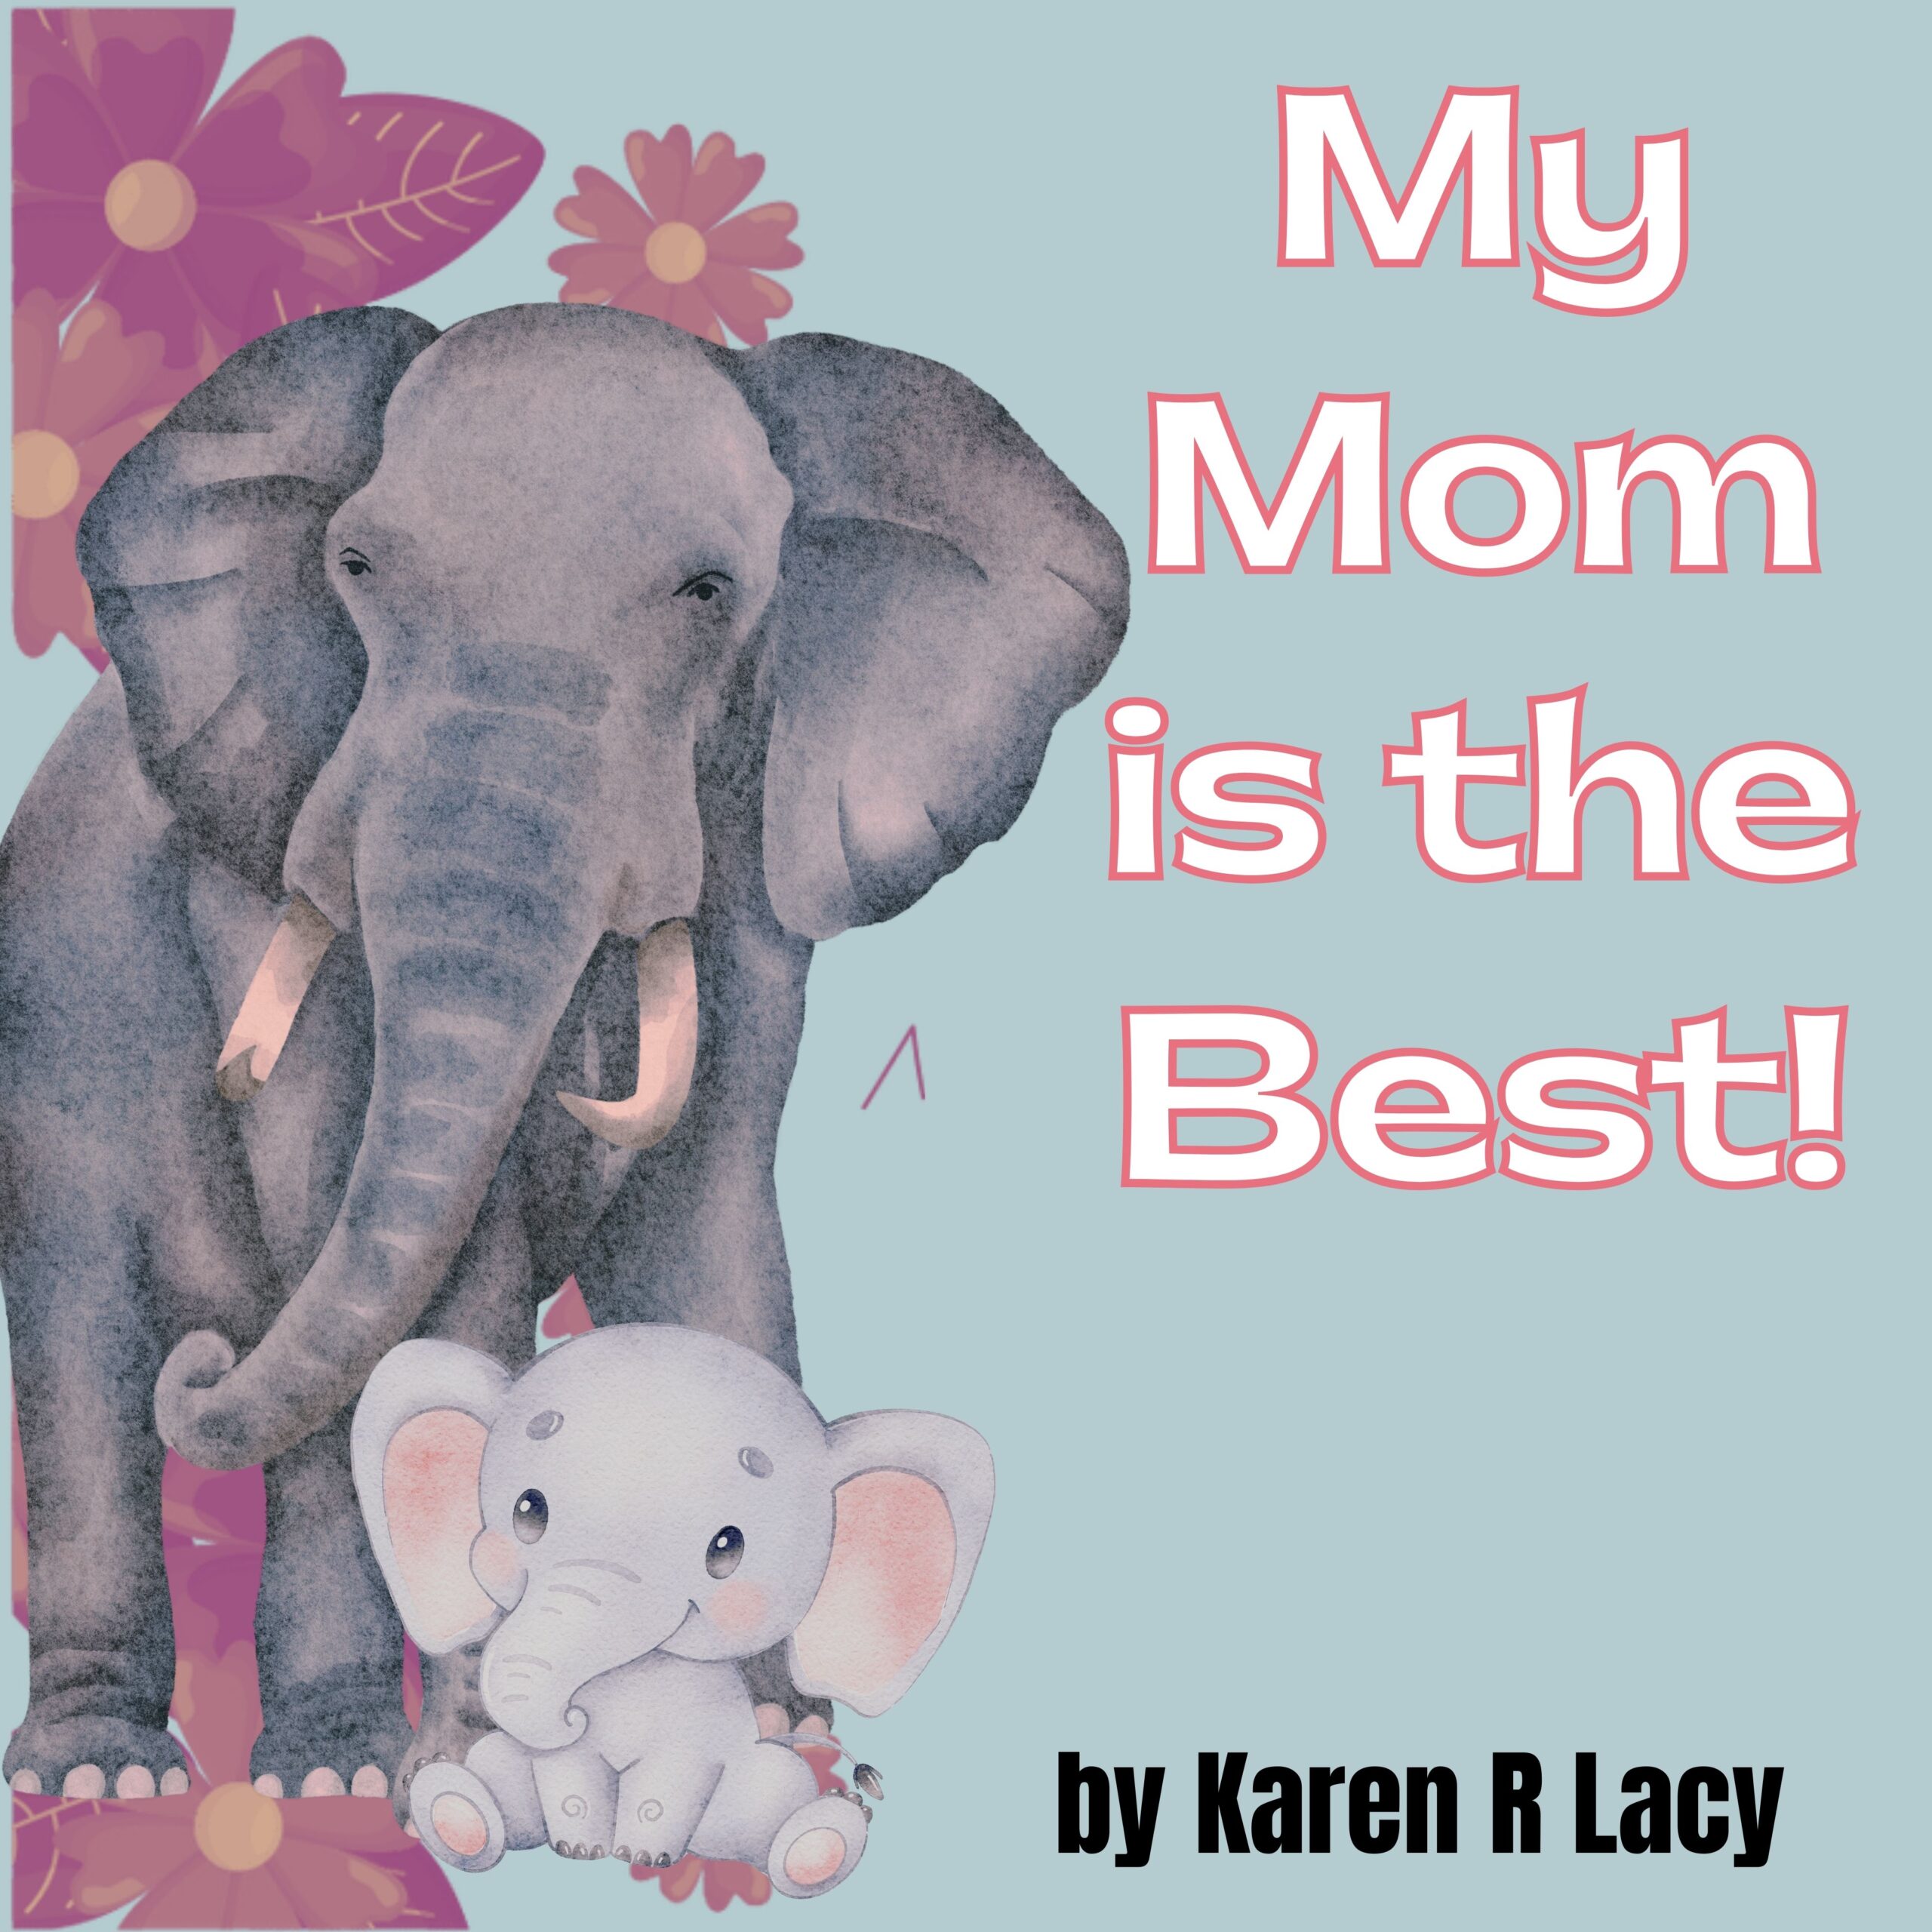 My Mom is the Best! by Karen R Lacy